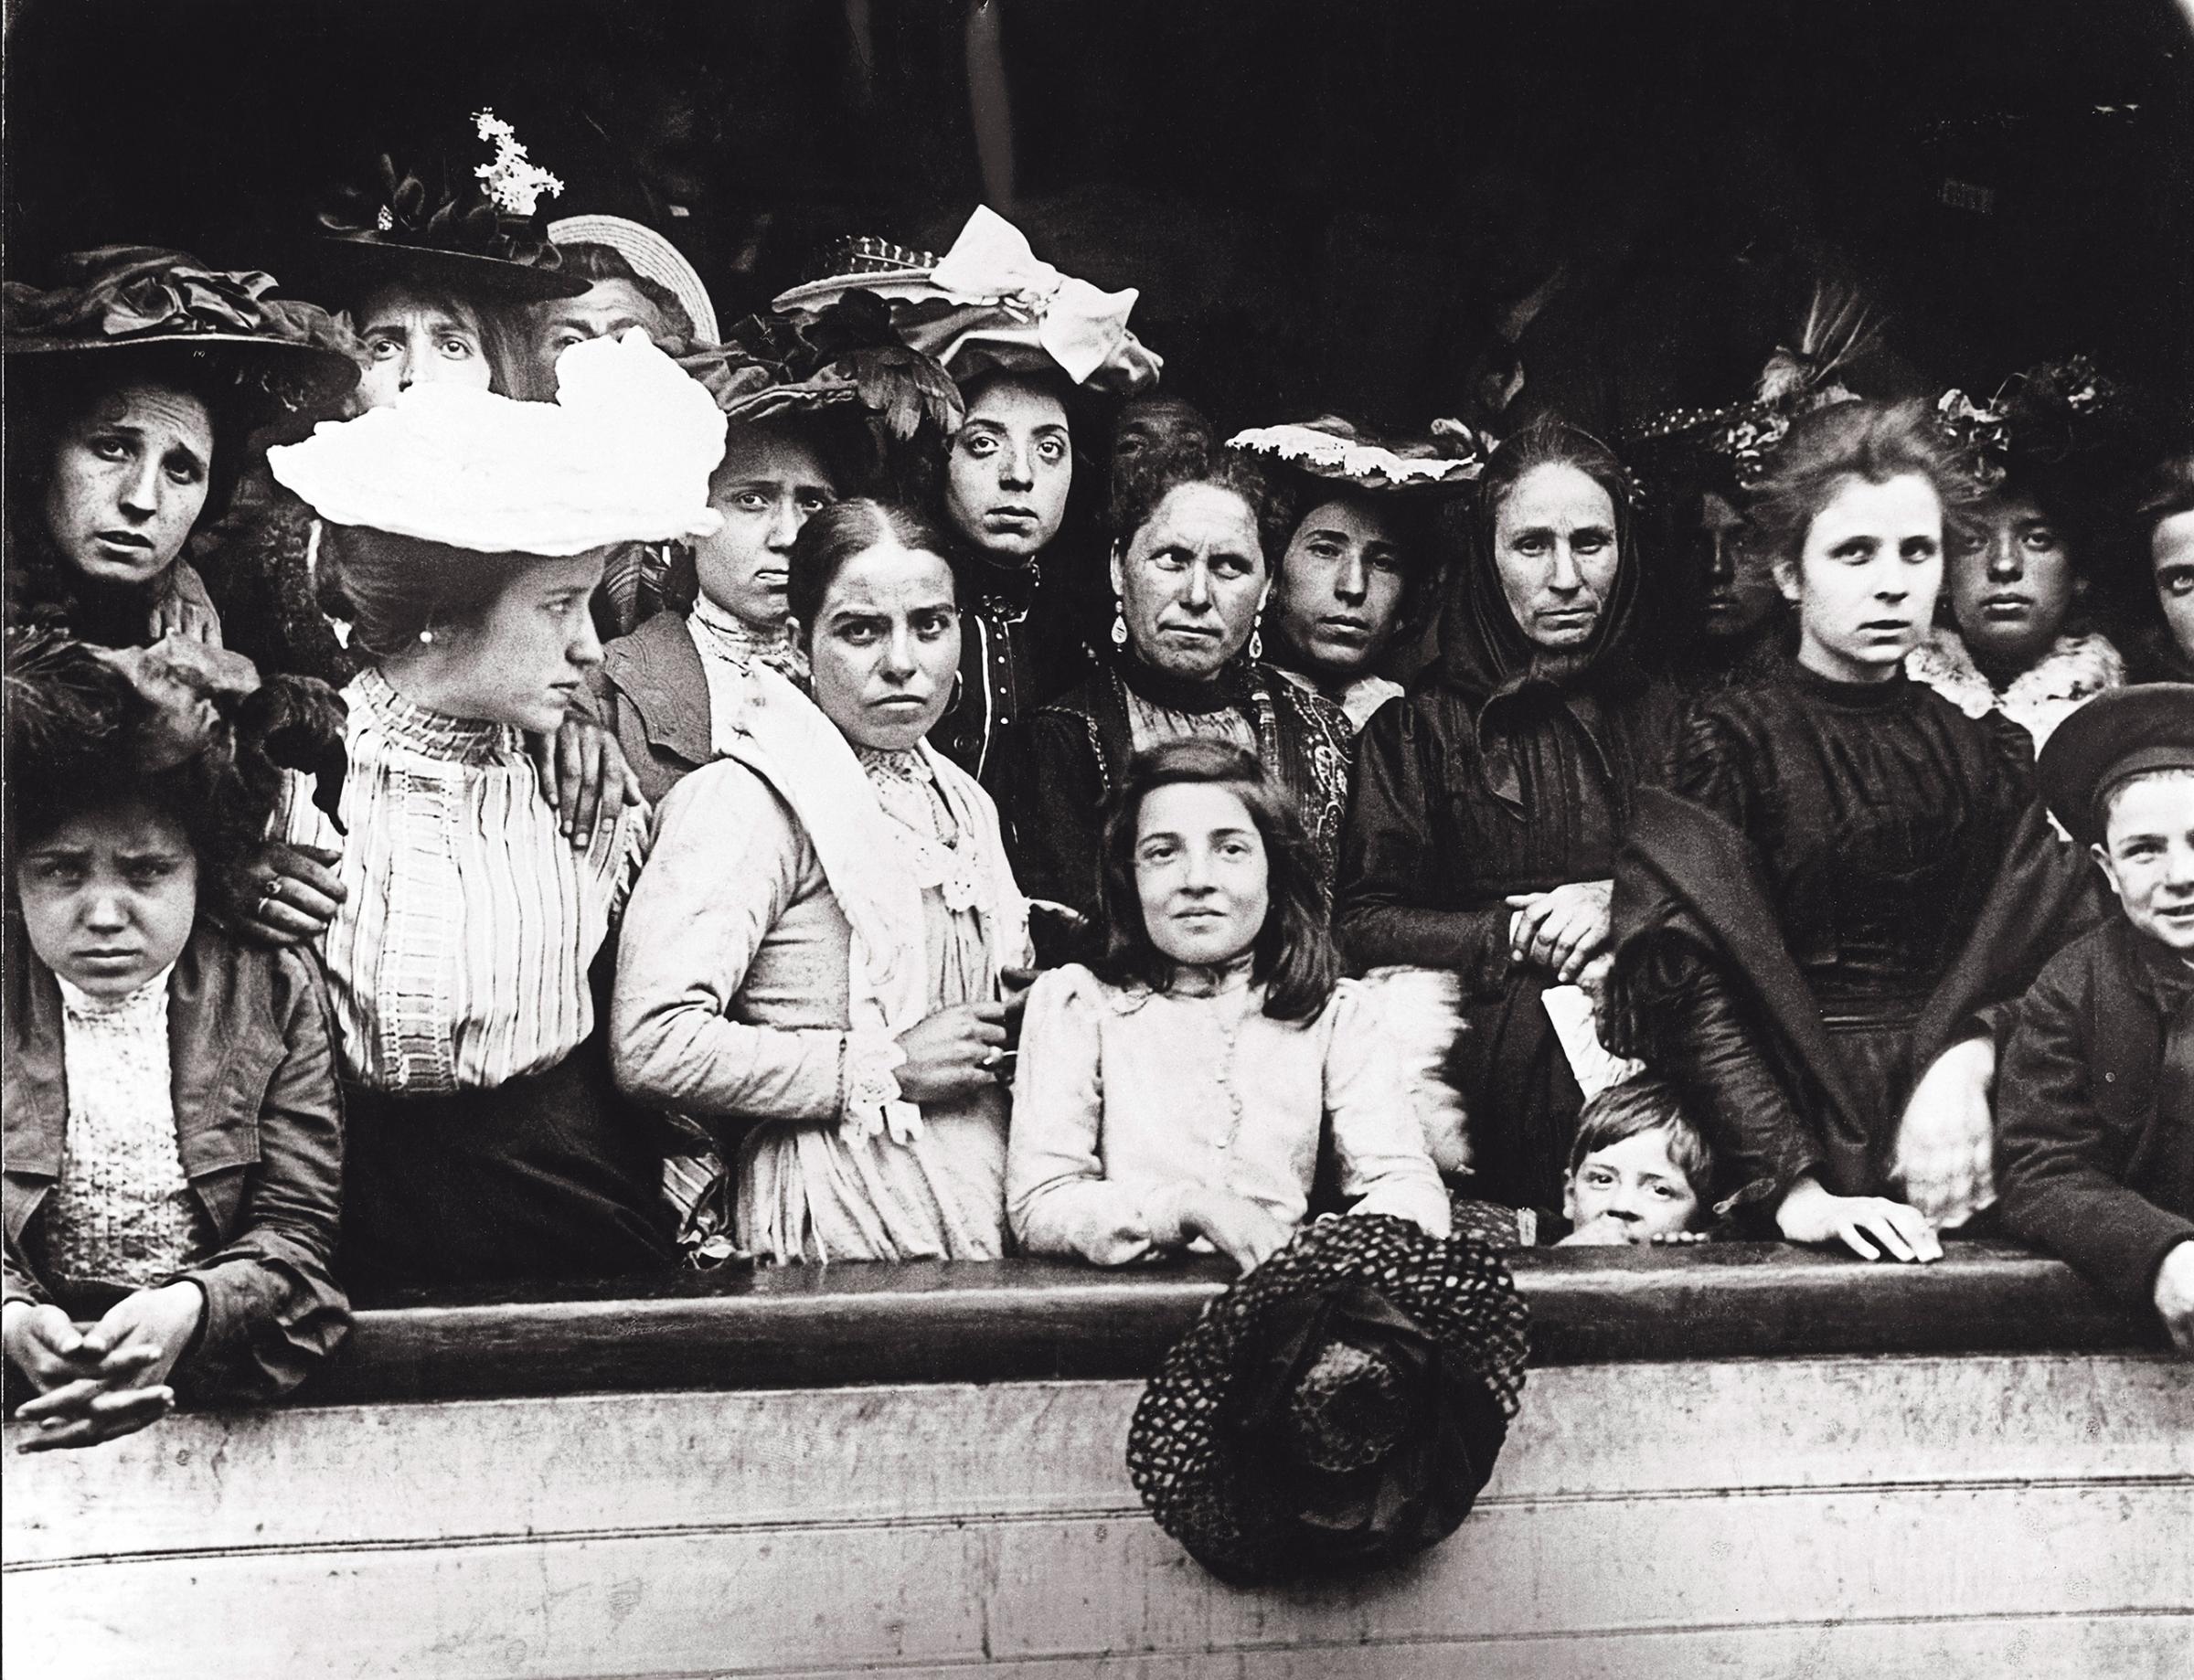 Immigrants on board of a ship arriving in New York, circa 1910.